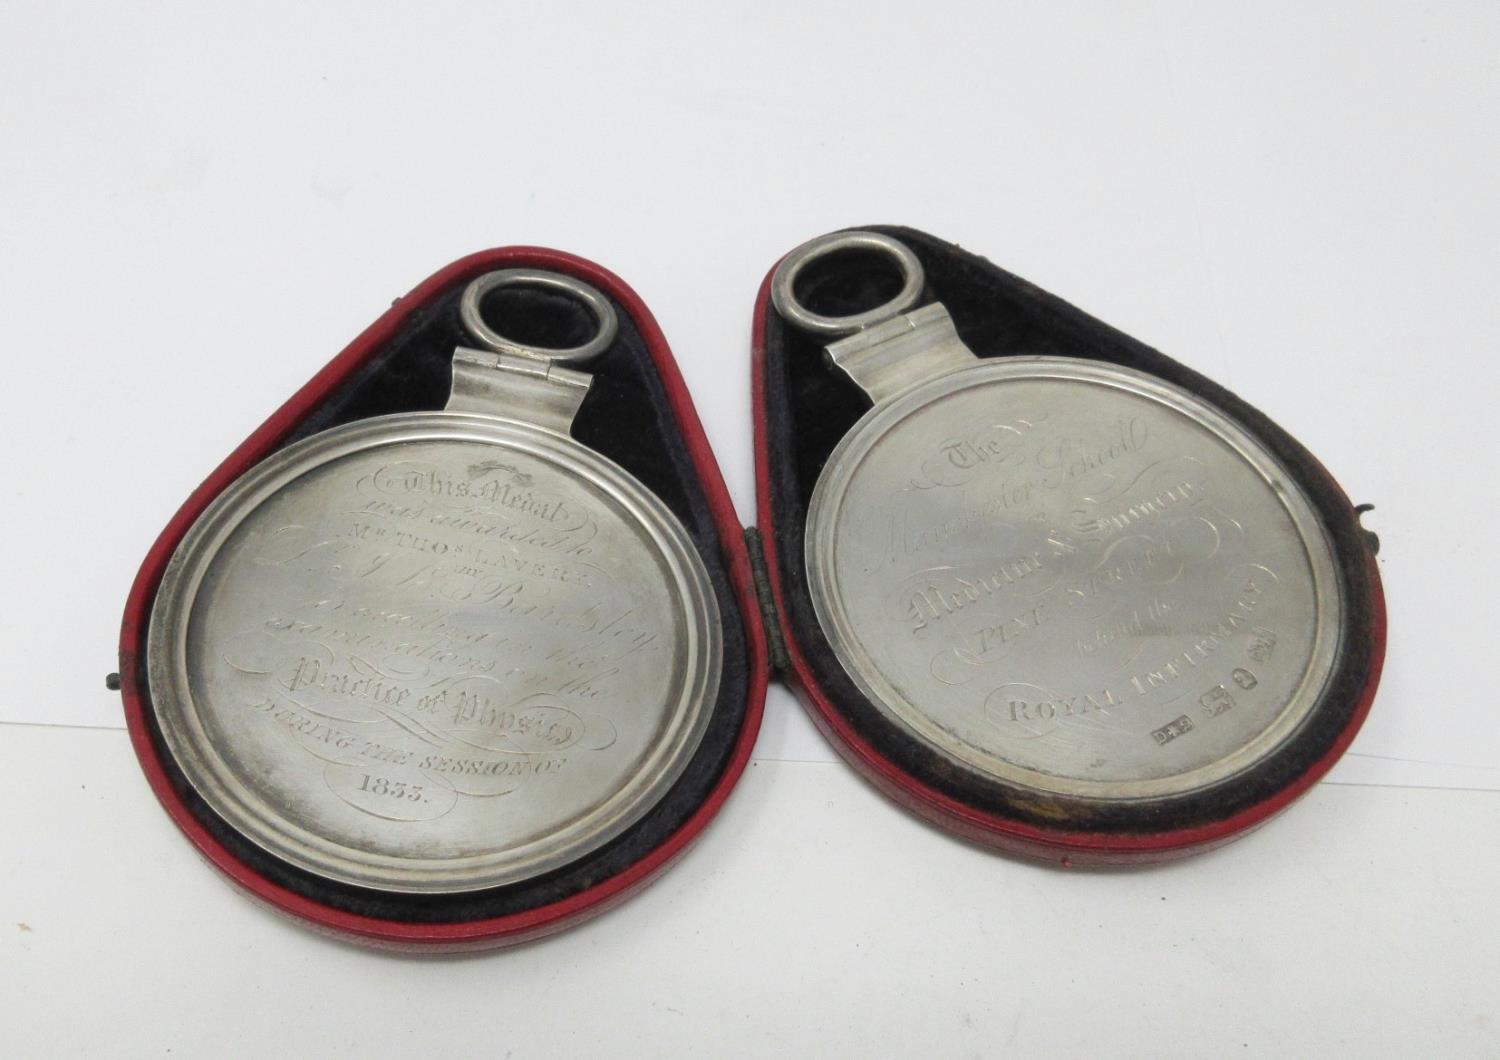 A pair of William IV silver Medical Medallions awarded to Dr J. Bardsley, 1832-3, Sheffield 1832, in - Image 2 of 2